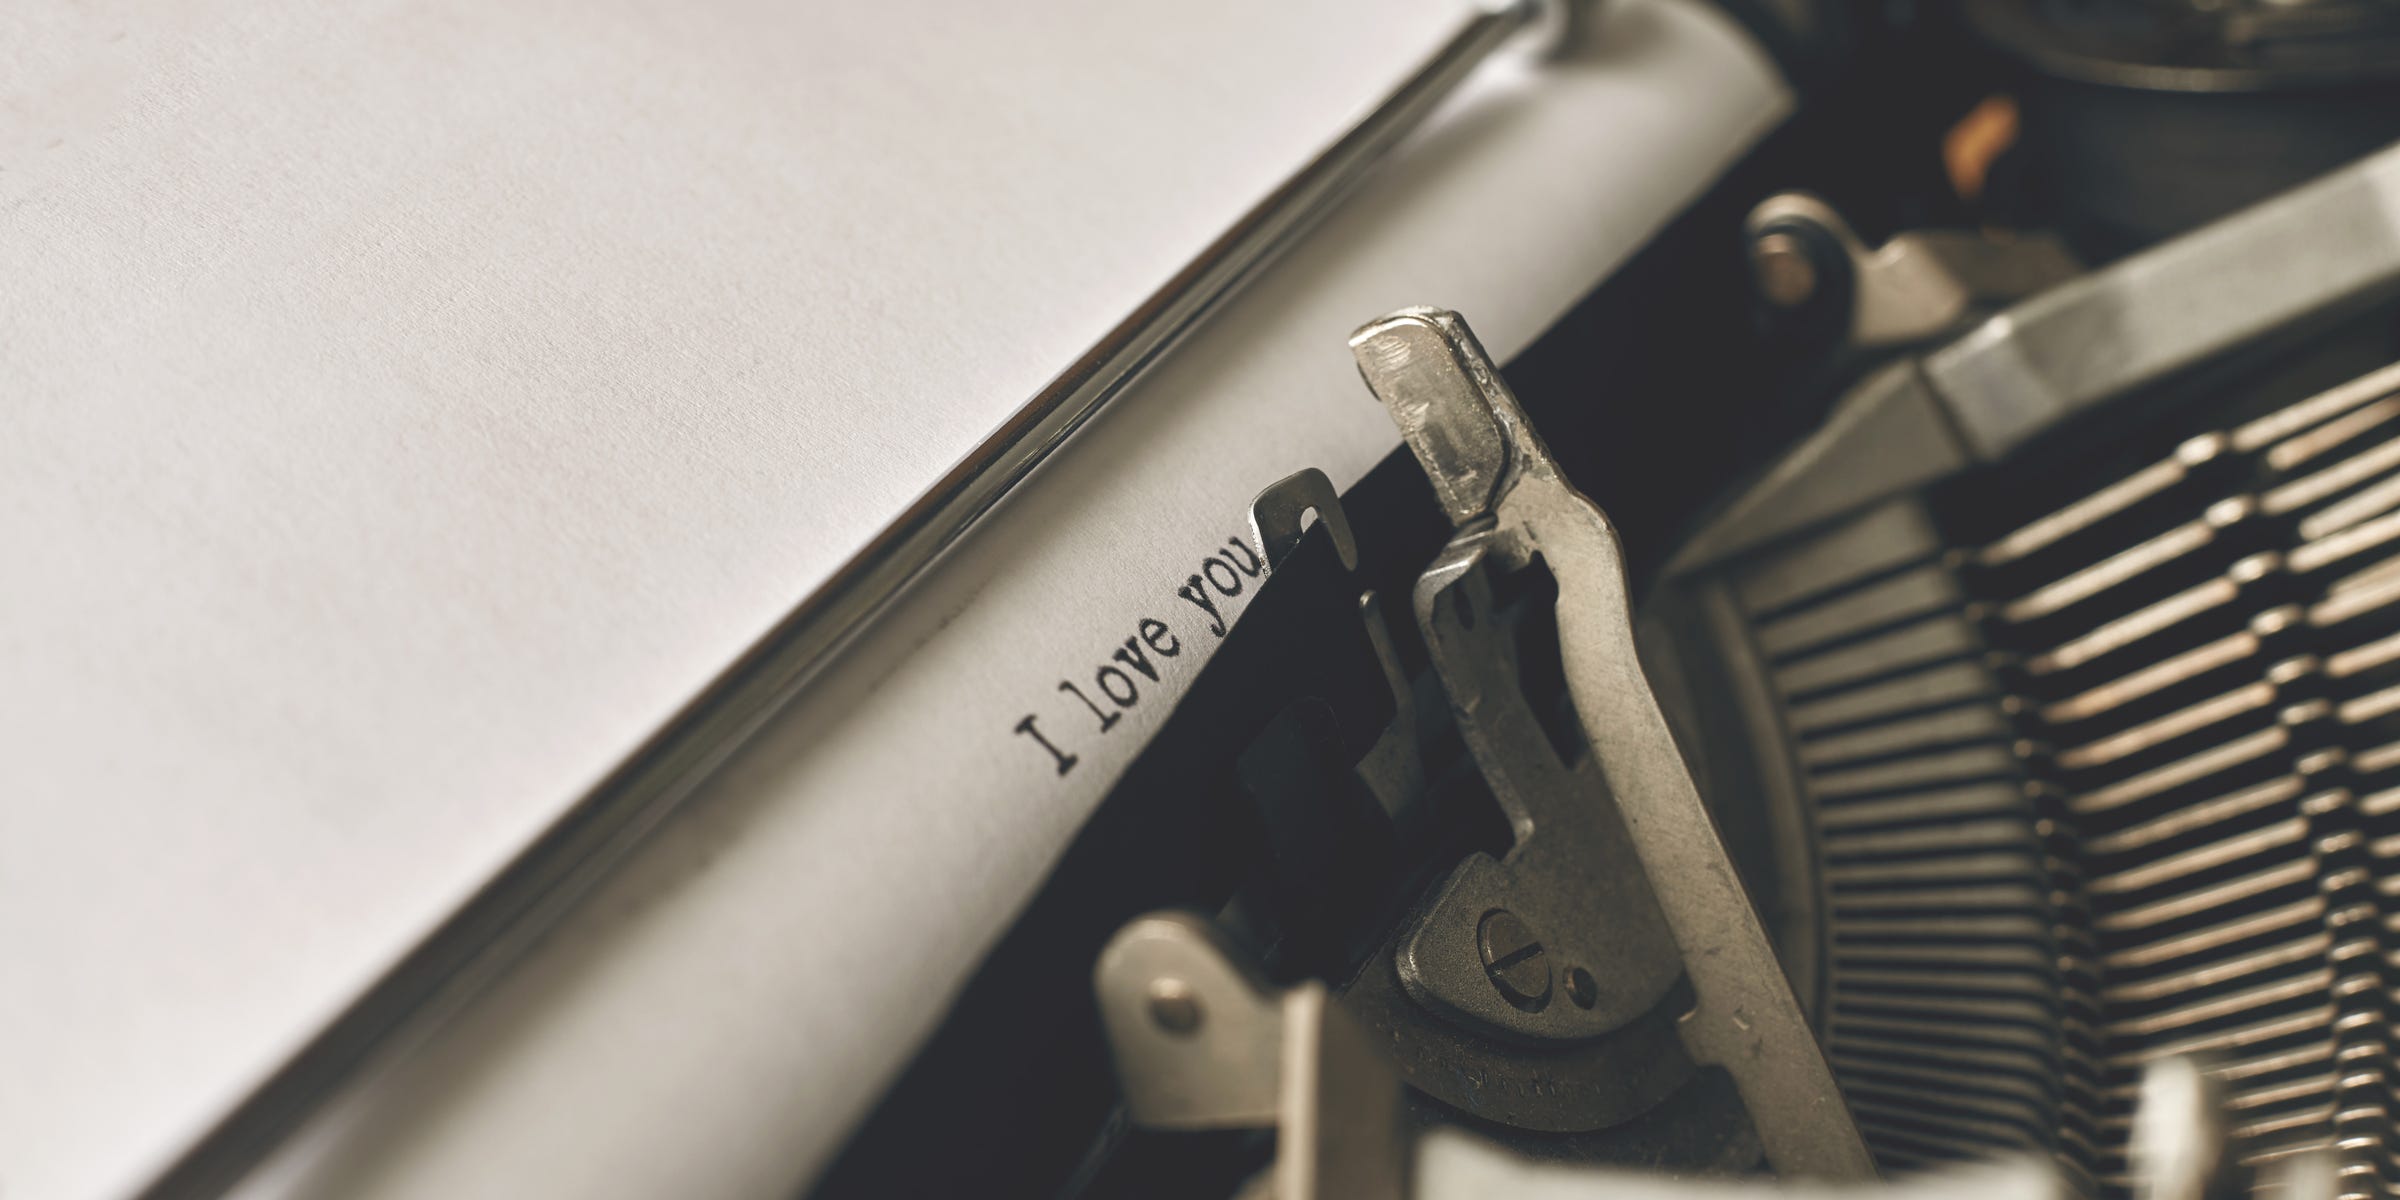 Typewriter with "I love you" typed on page - how to fall in love with writing